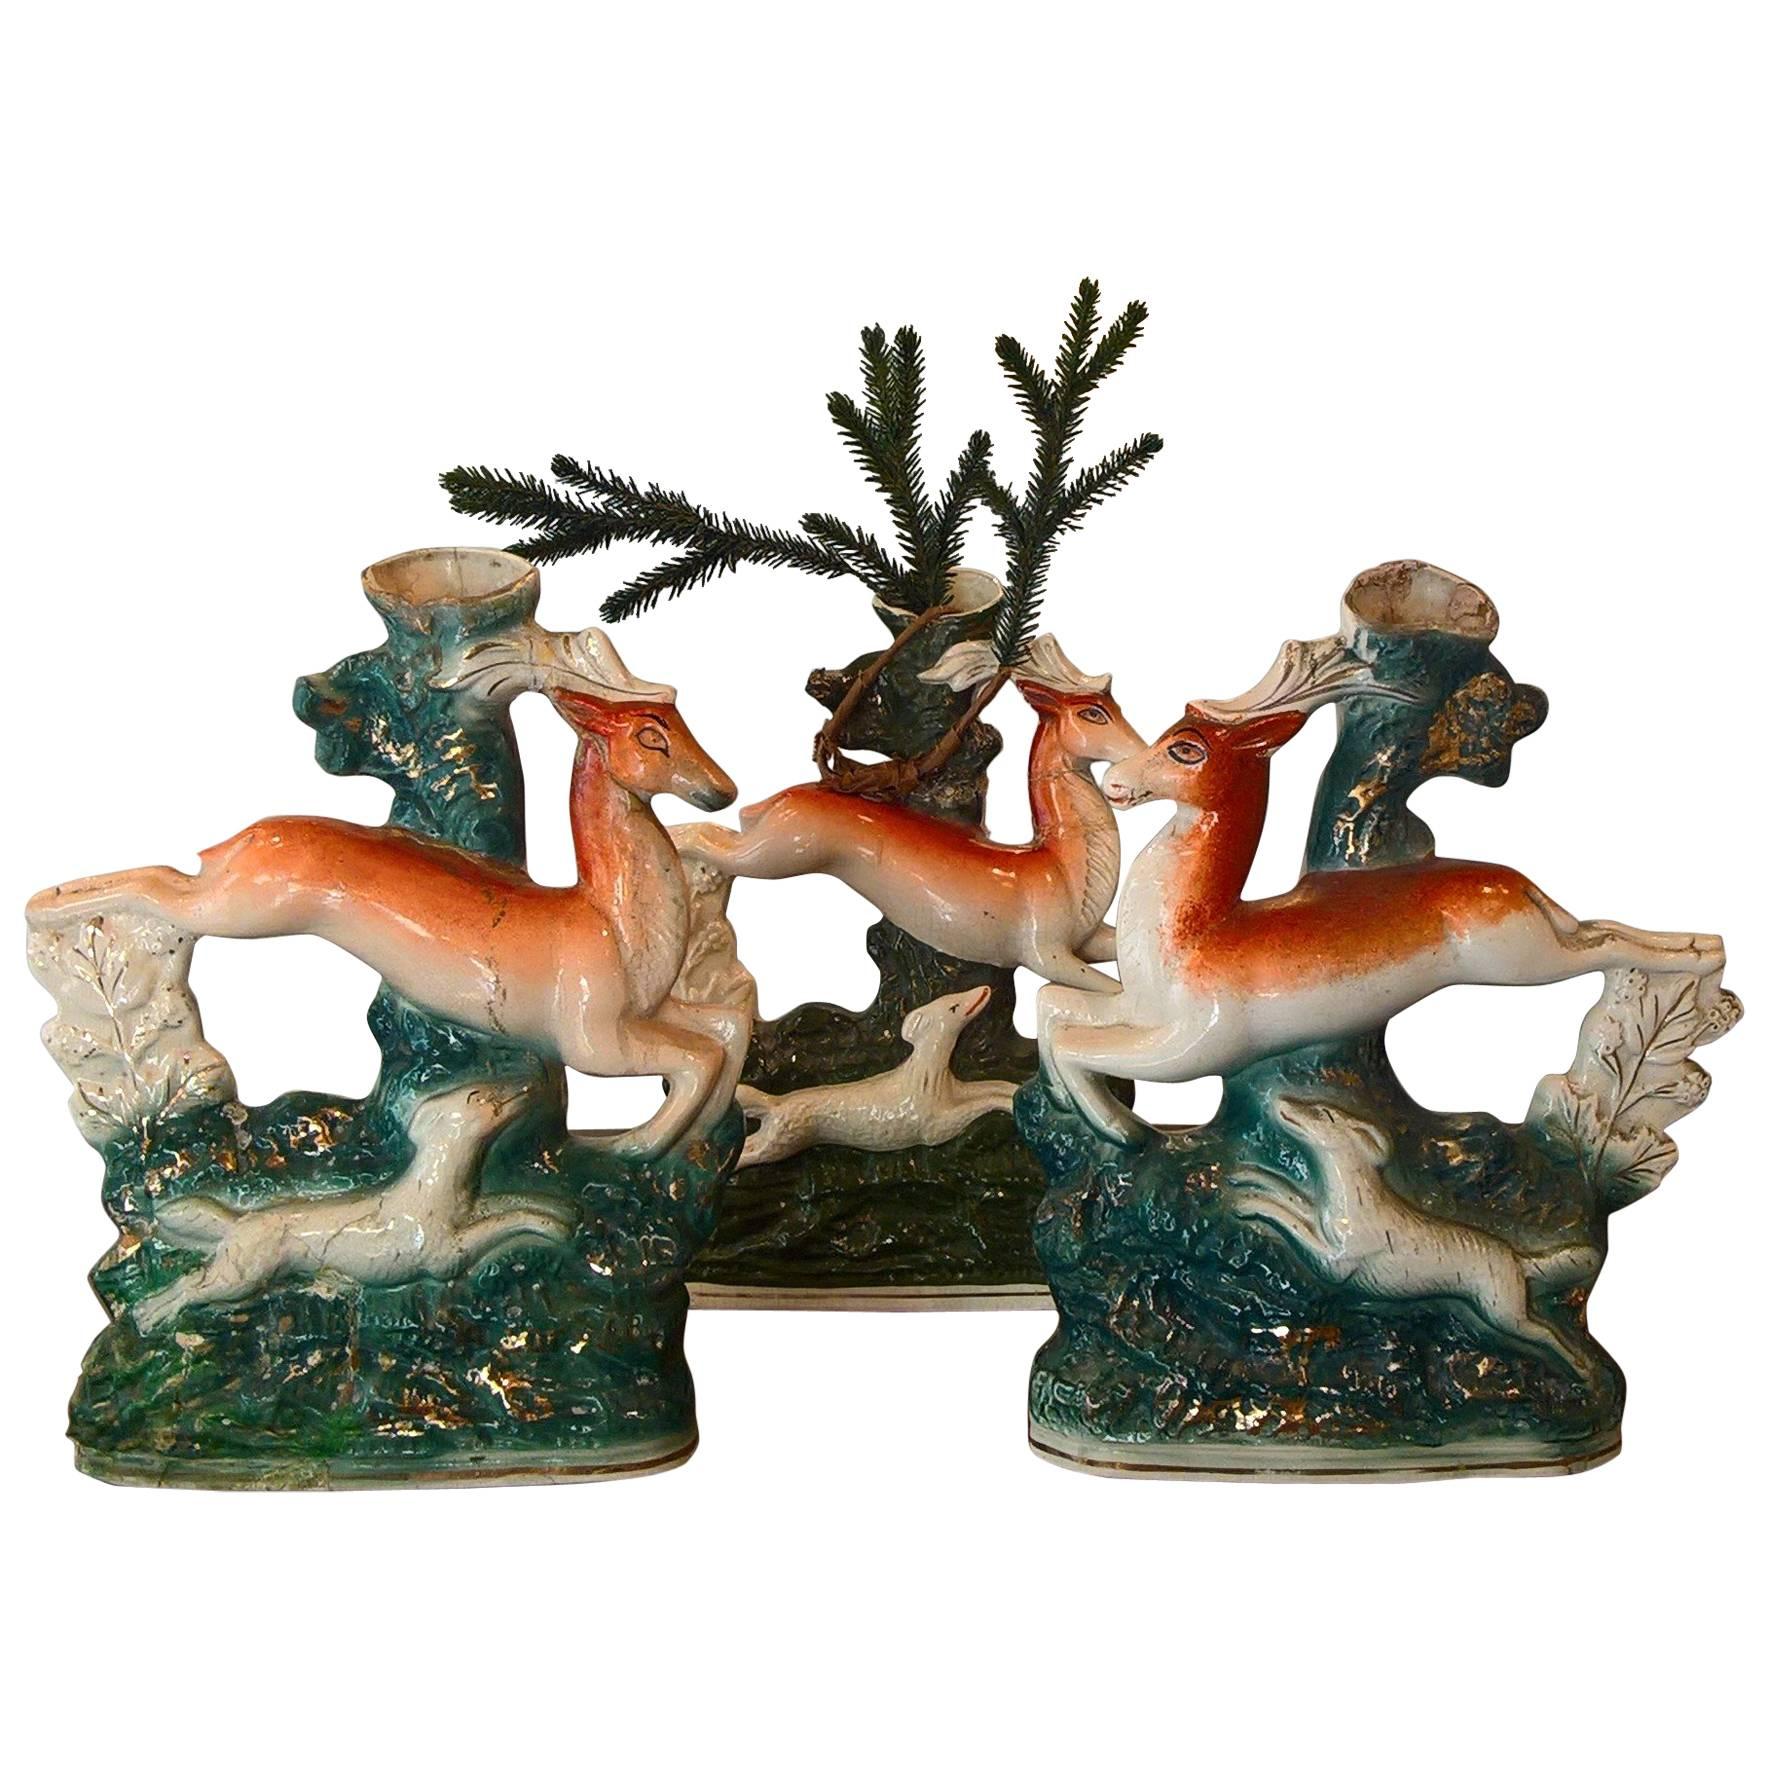 19th Century English Staffordshire Pottery Vases Deers and Dogs